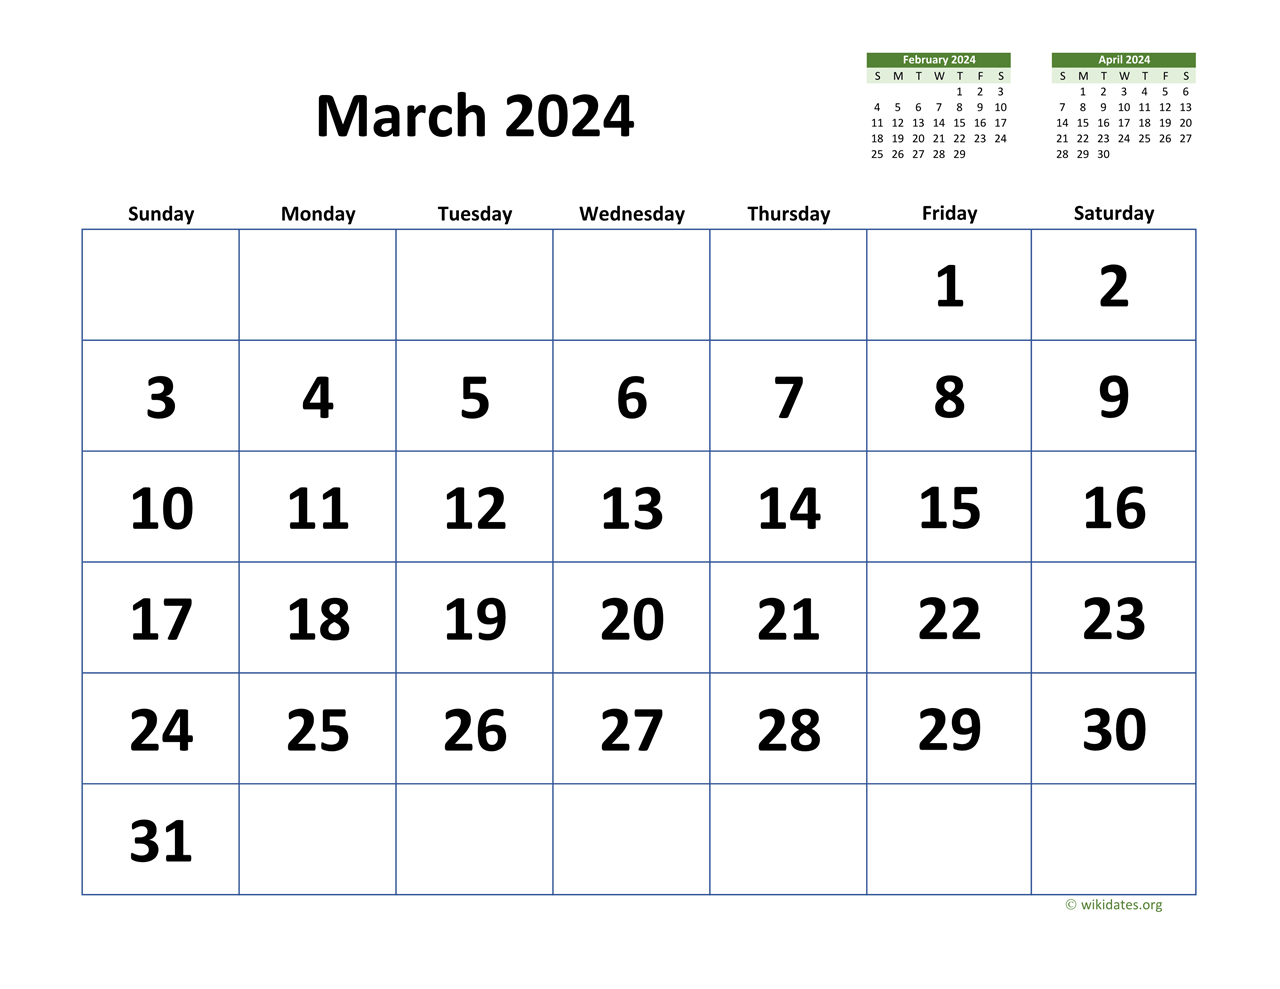 March 2024 Calendar with Extralarge Dates